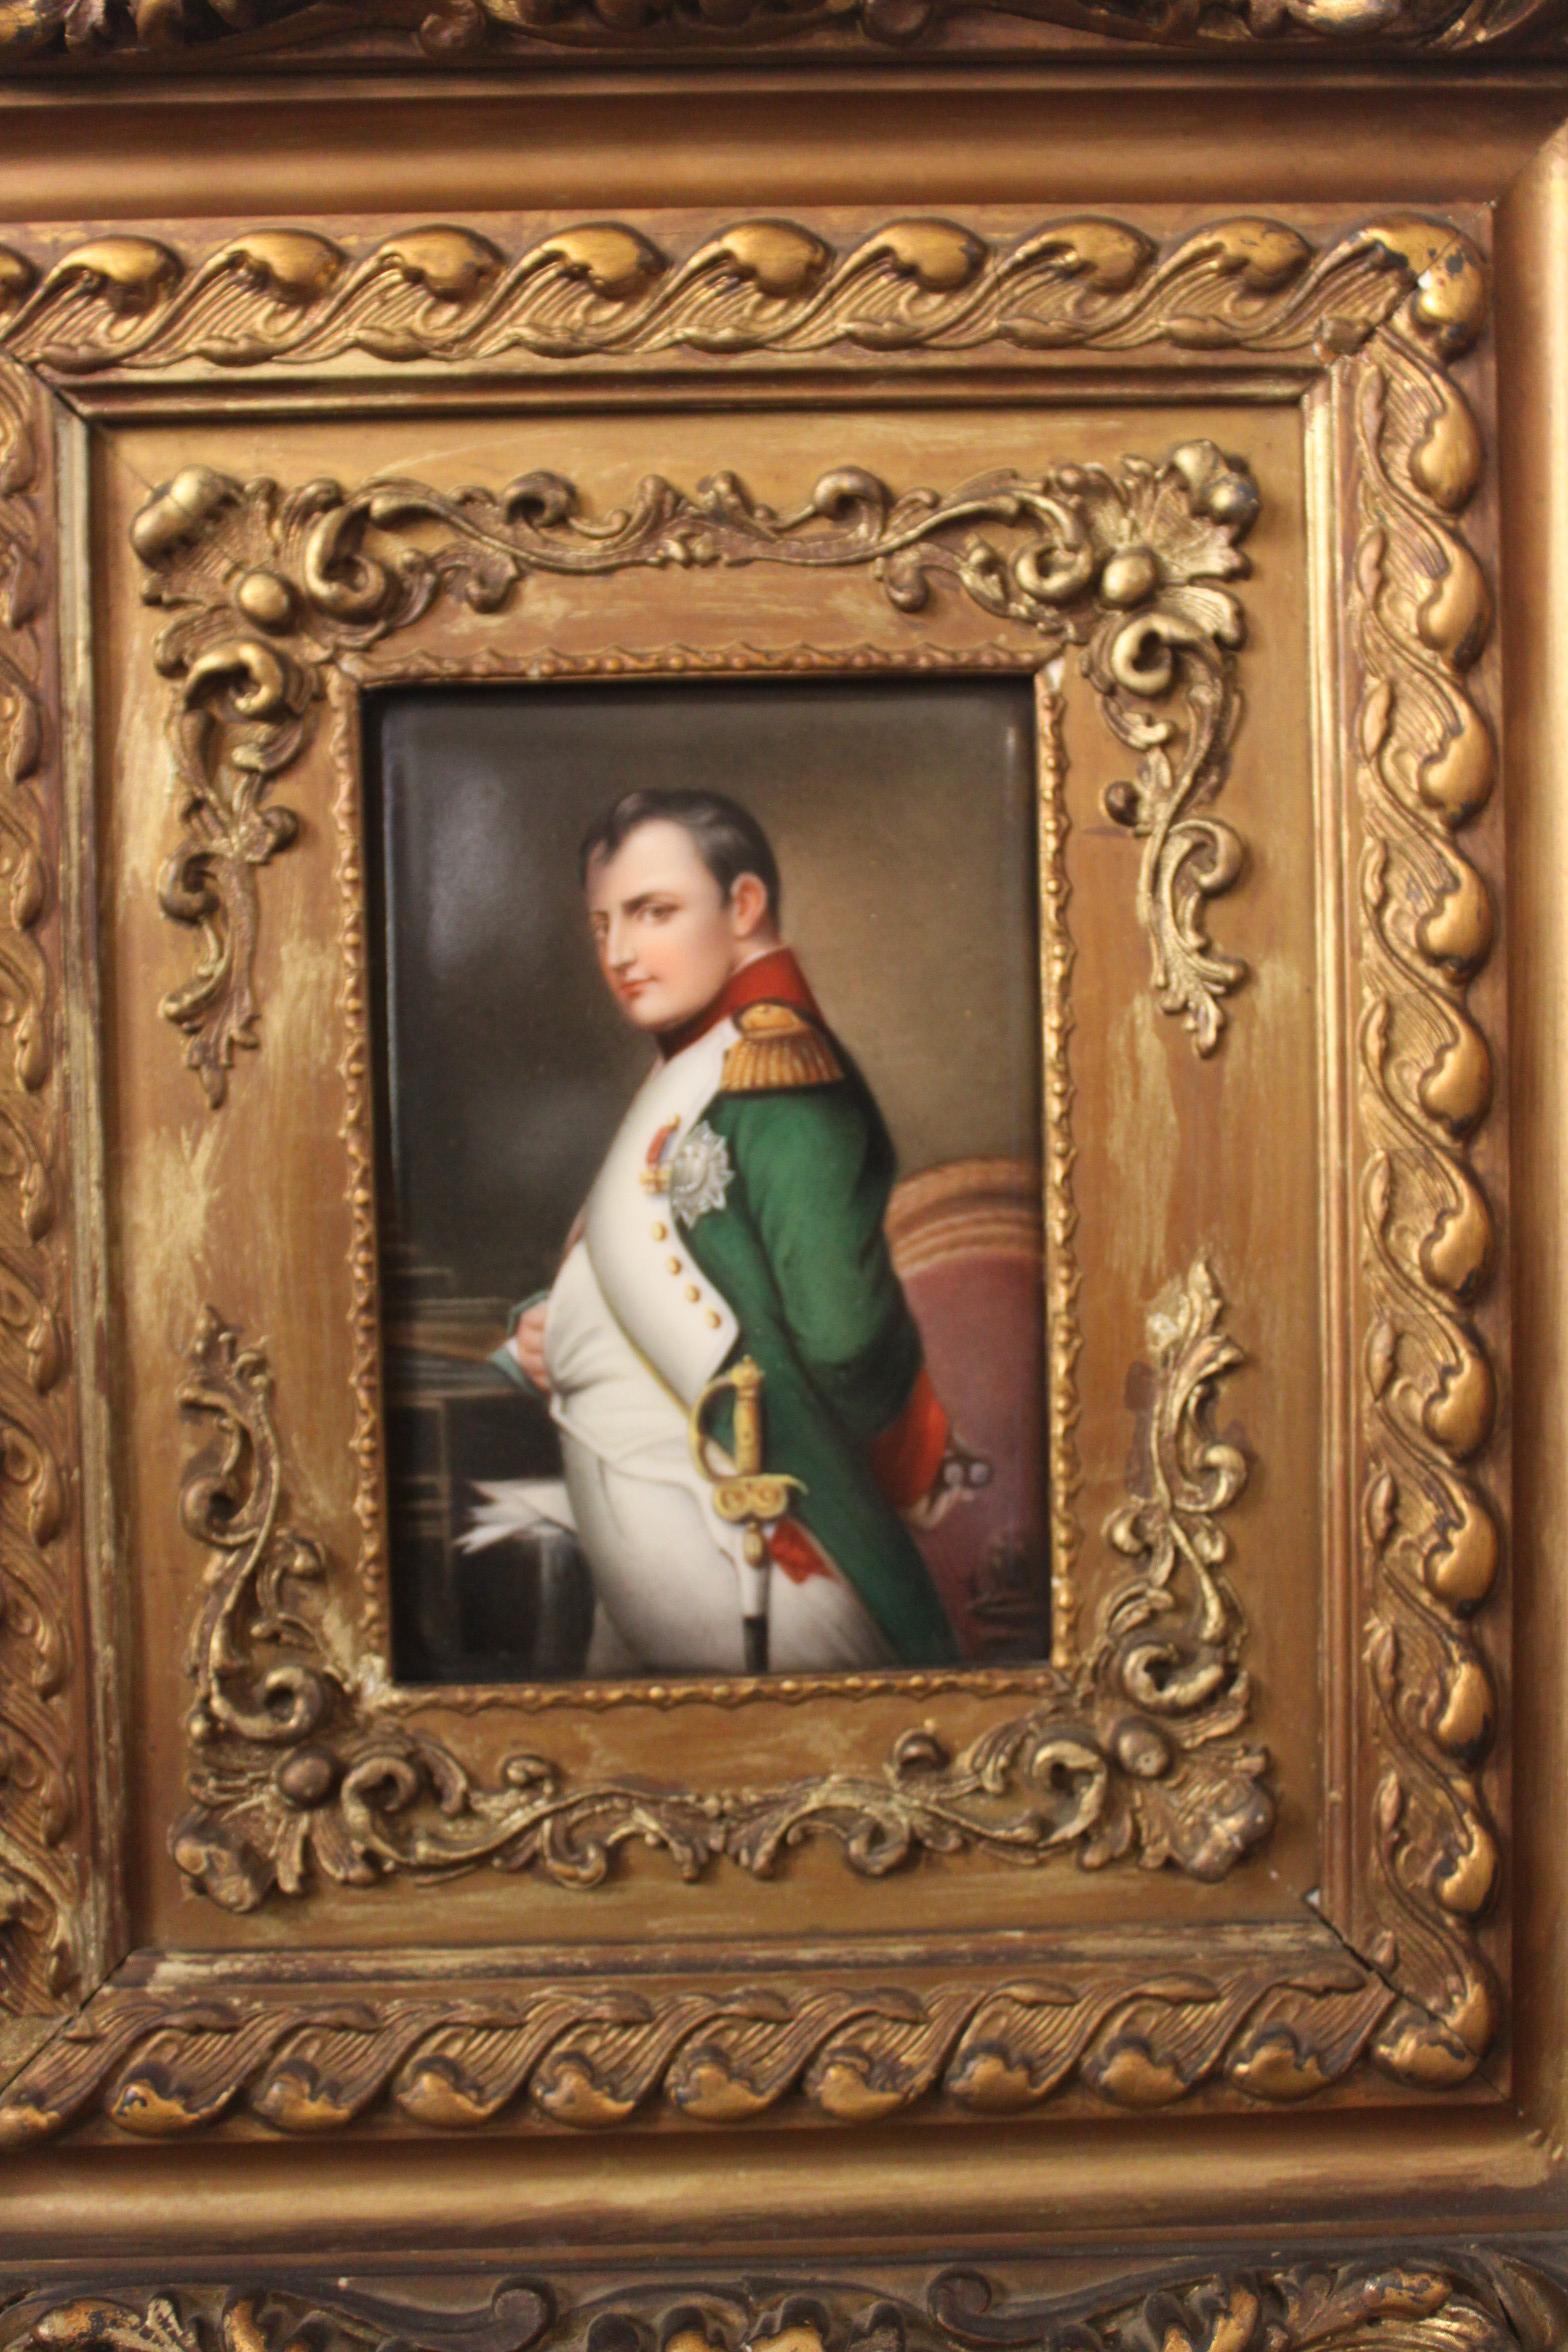 French Antique Hand-Painted Porcelain Framed Plaque or Panel of Napoleon Bonaparte For Sale